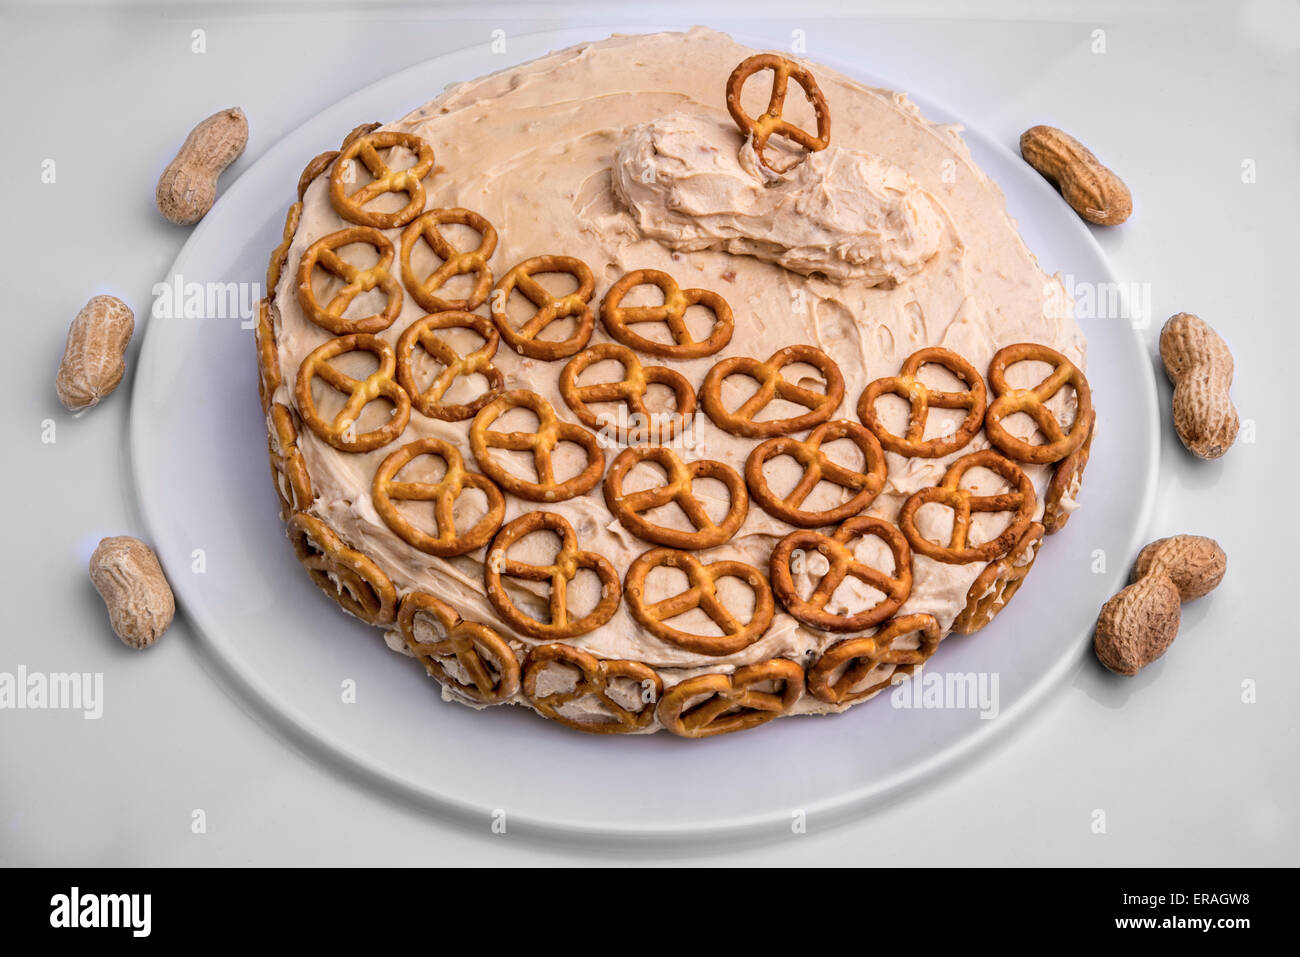 The sweet and salty chocolate cake with peanut butter icing and decorated with pretzels for added crunch. Stock Photo